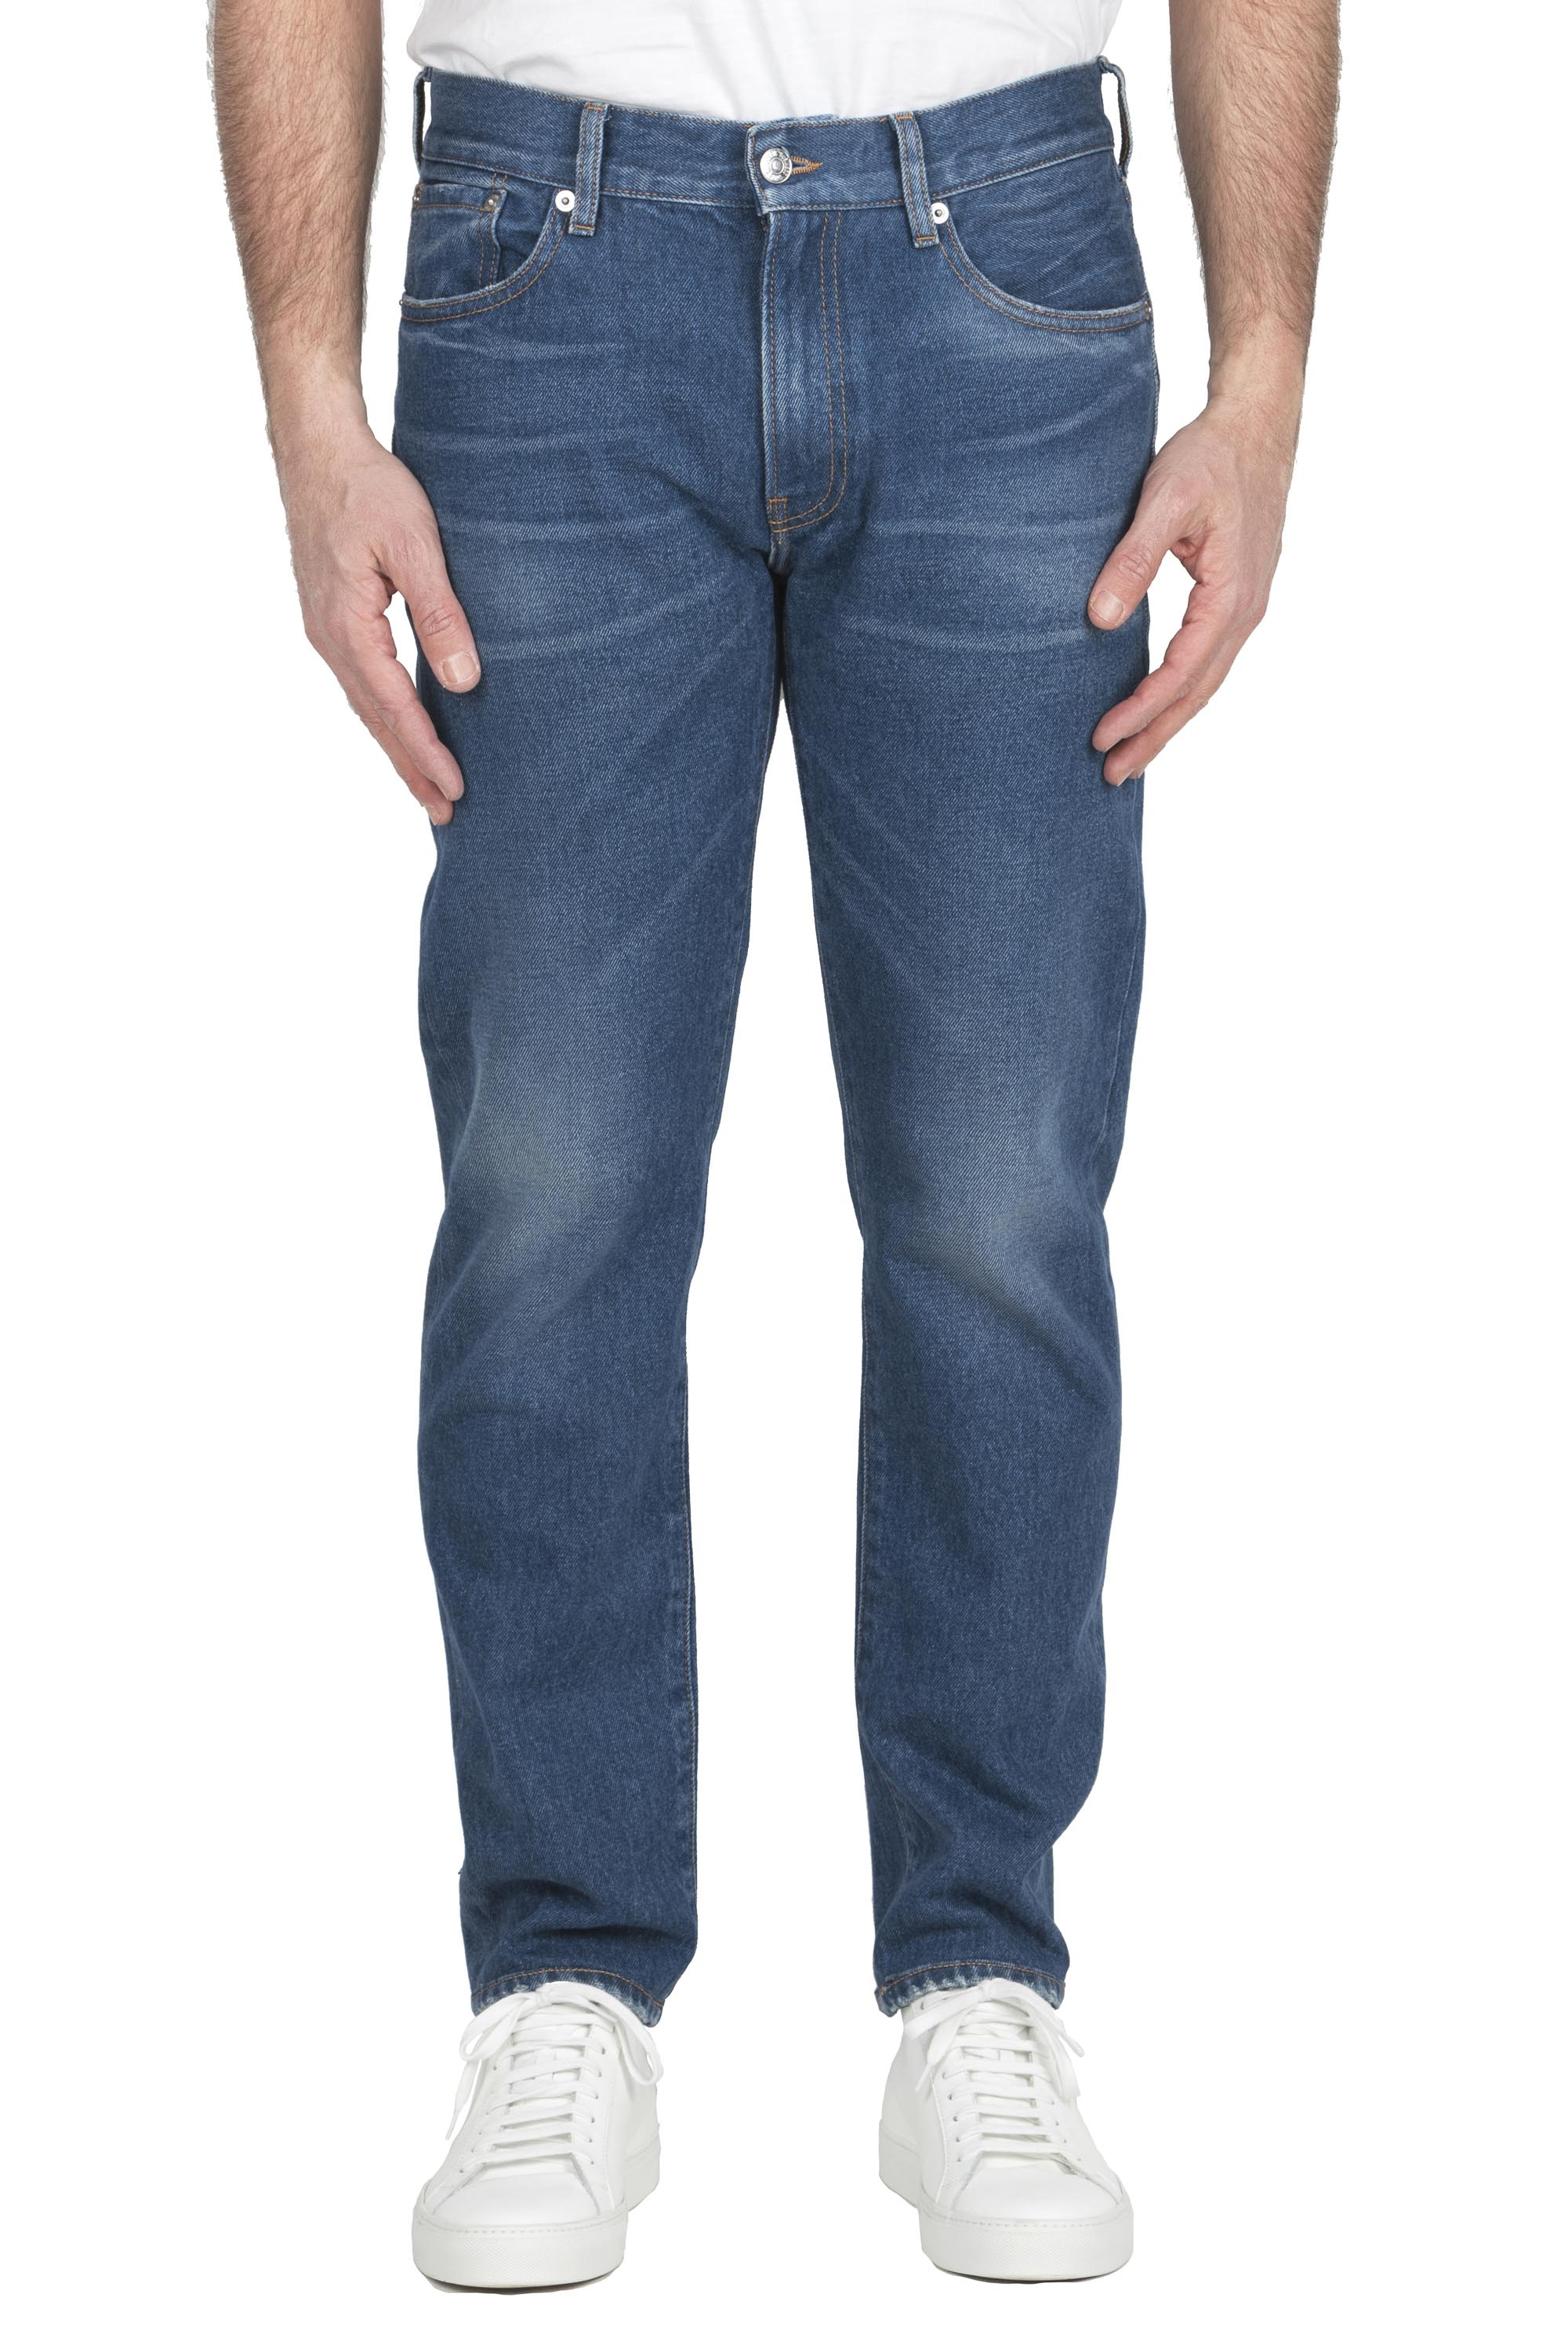 SBU 04958_24SS Blue jeans stone washed in cotone tinto indaco 01